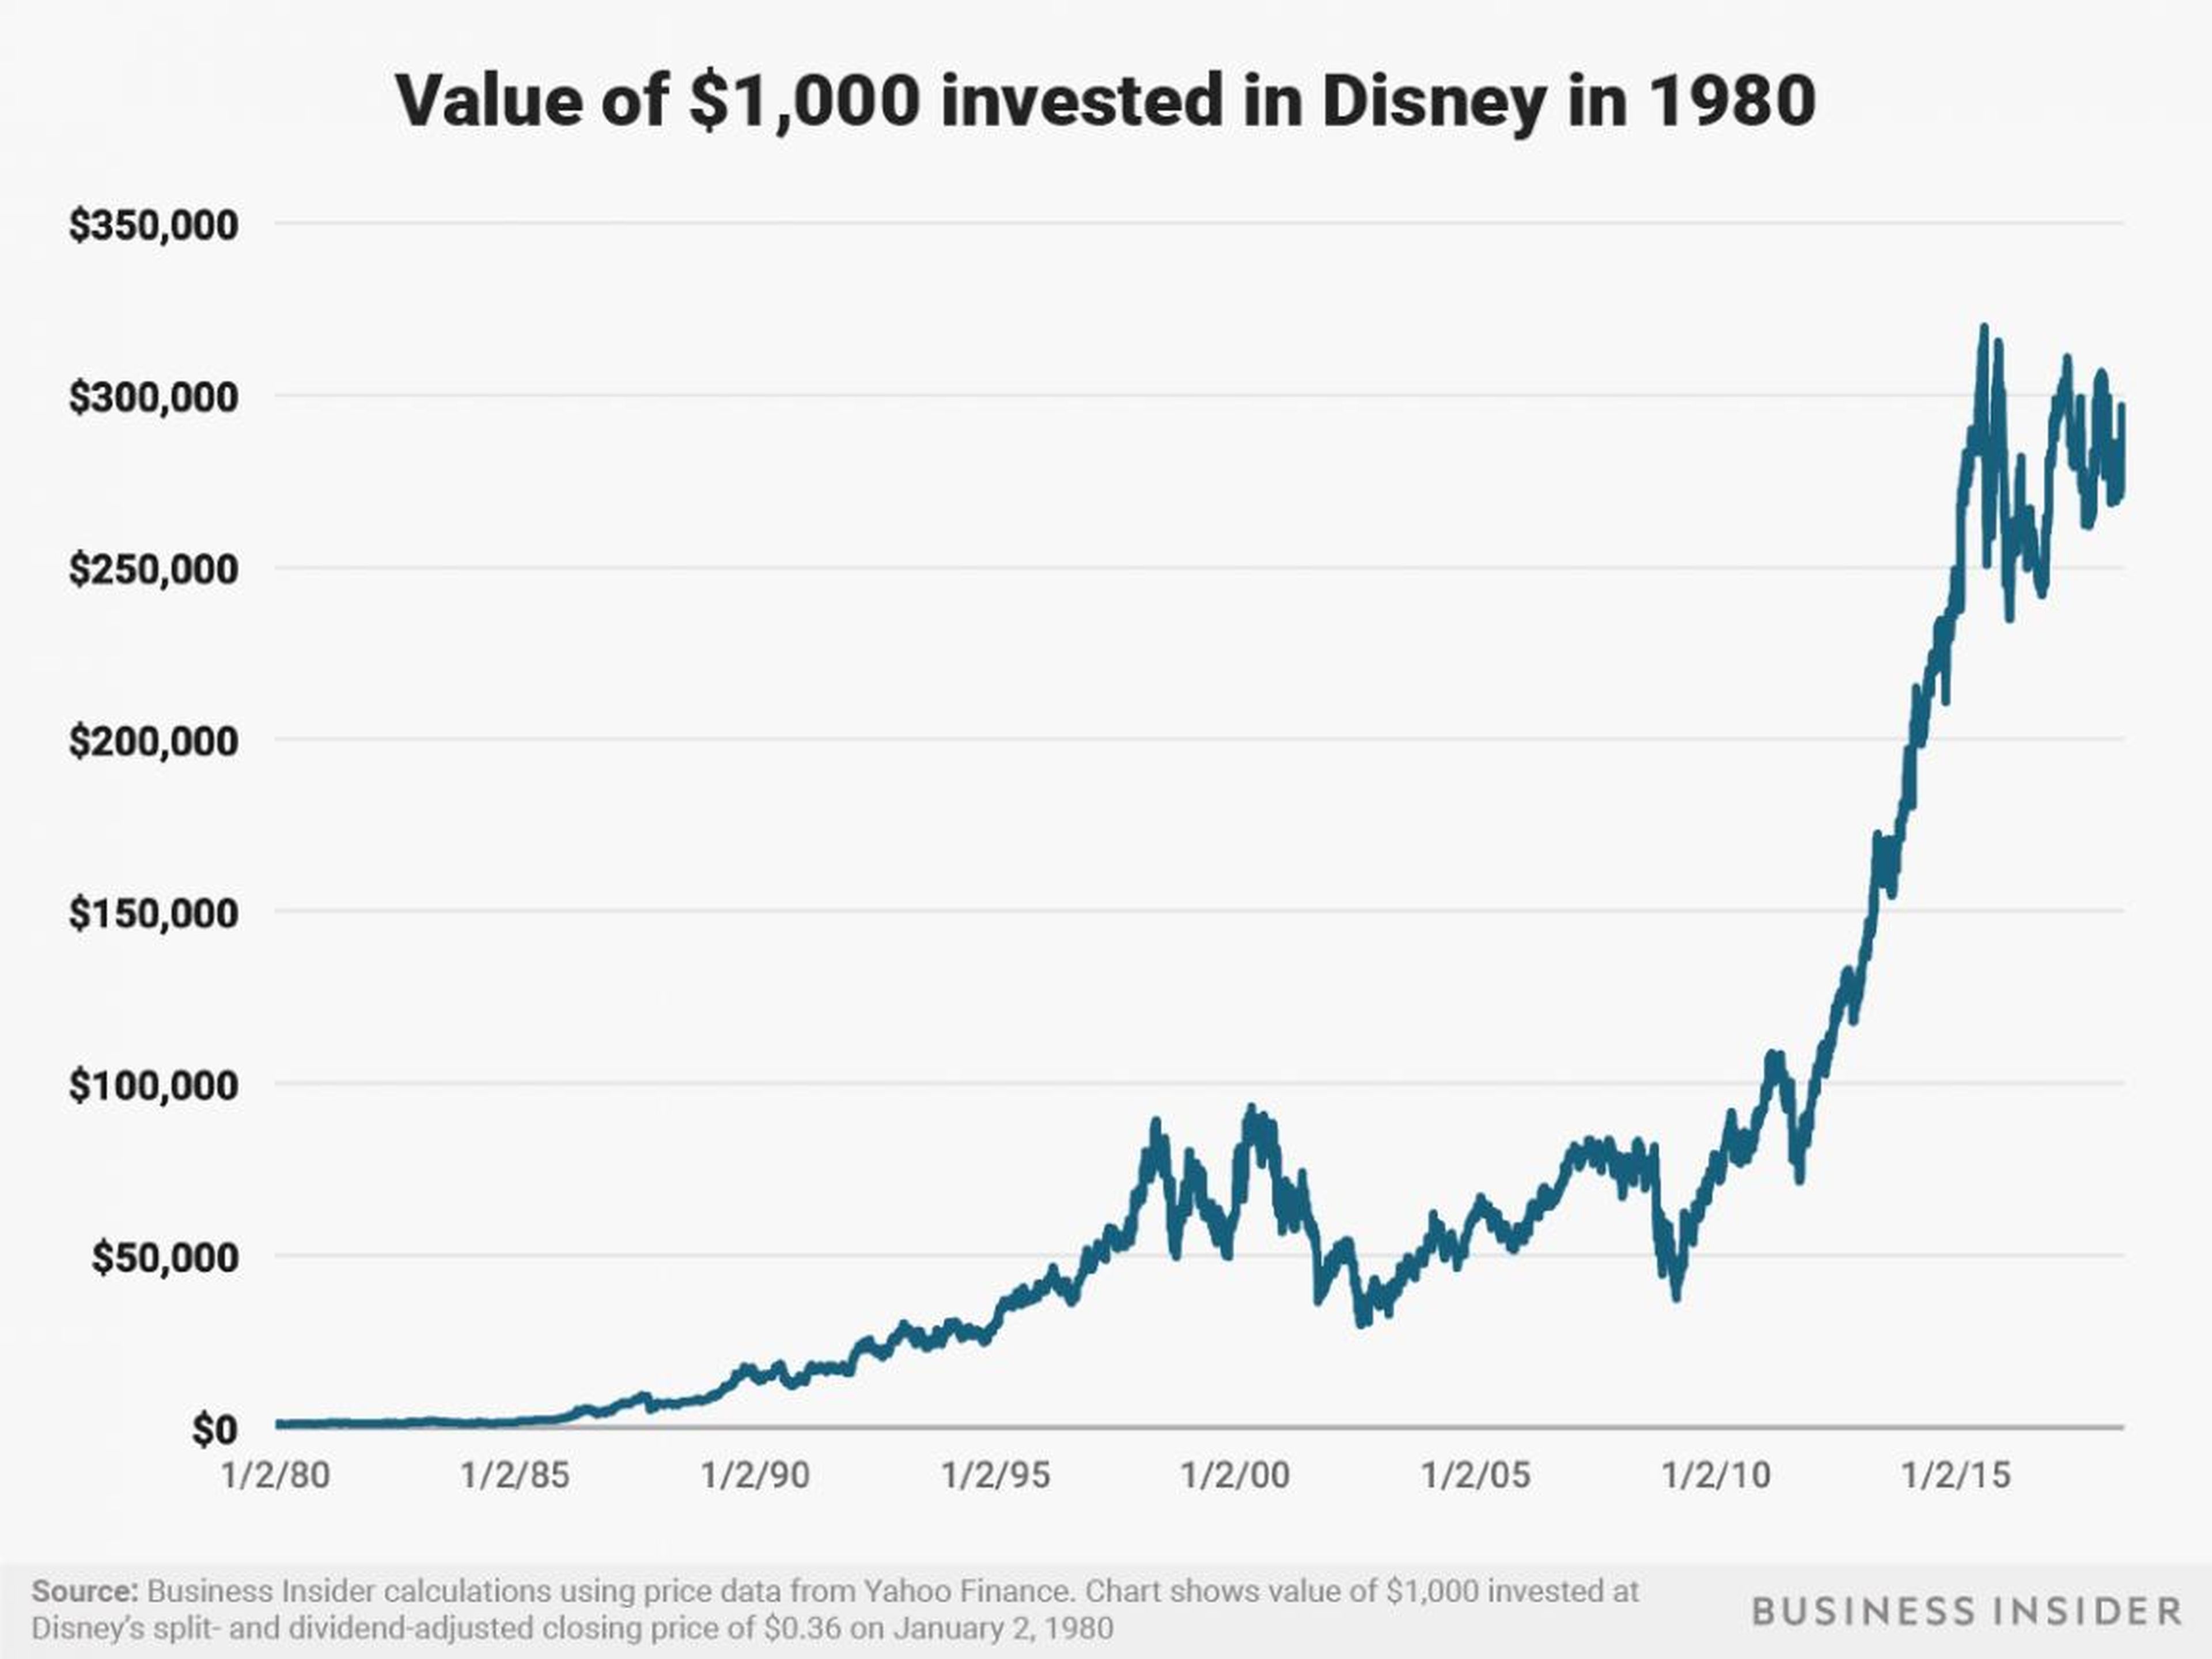 A $1,000 investment in Disney at the beginning of 1980 would be worth about $280,000 as of July 3, 2018.